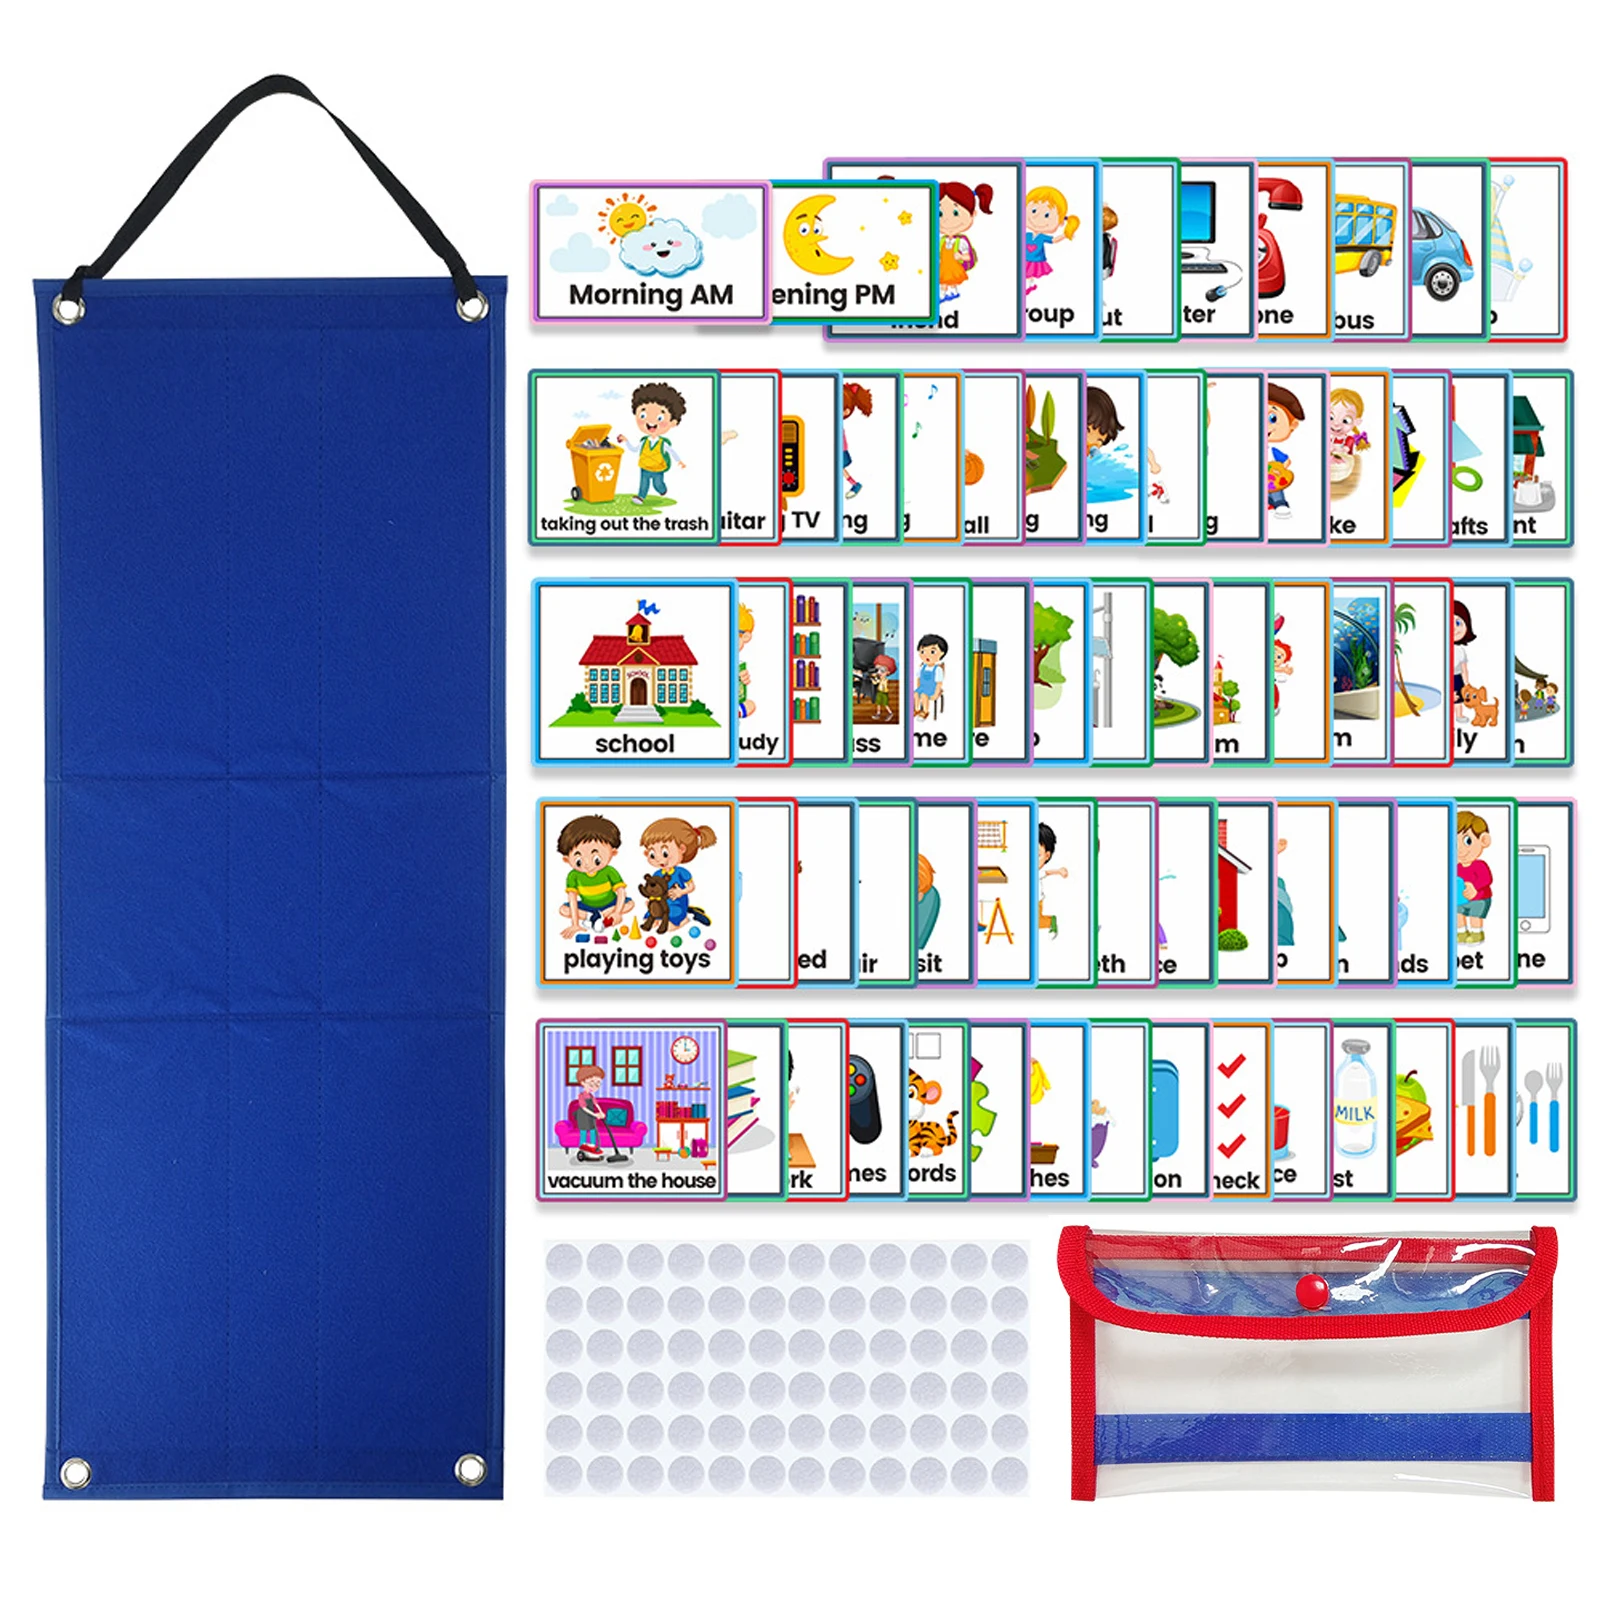 

224pcs/set Planner Chart Nursery Preschool Daily Routine Visual Schedule School For Kids Learning With Activity Cards Home